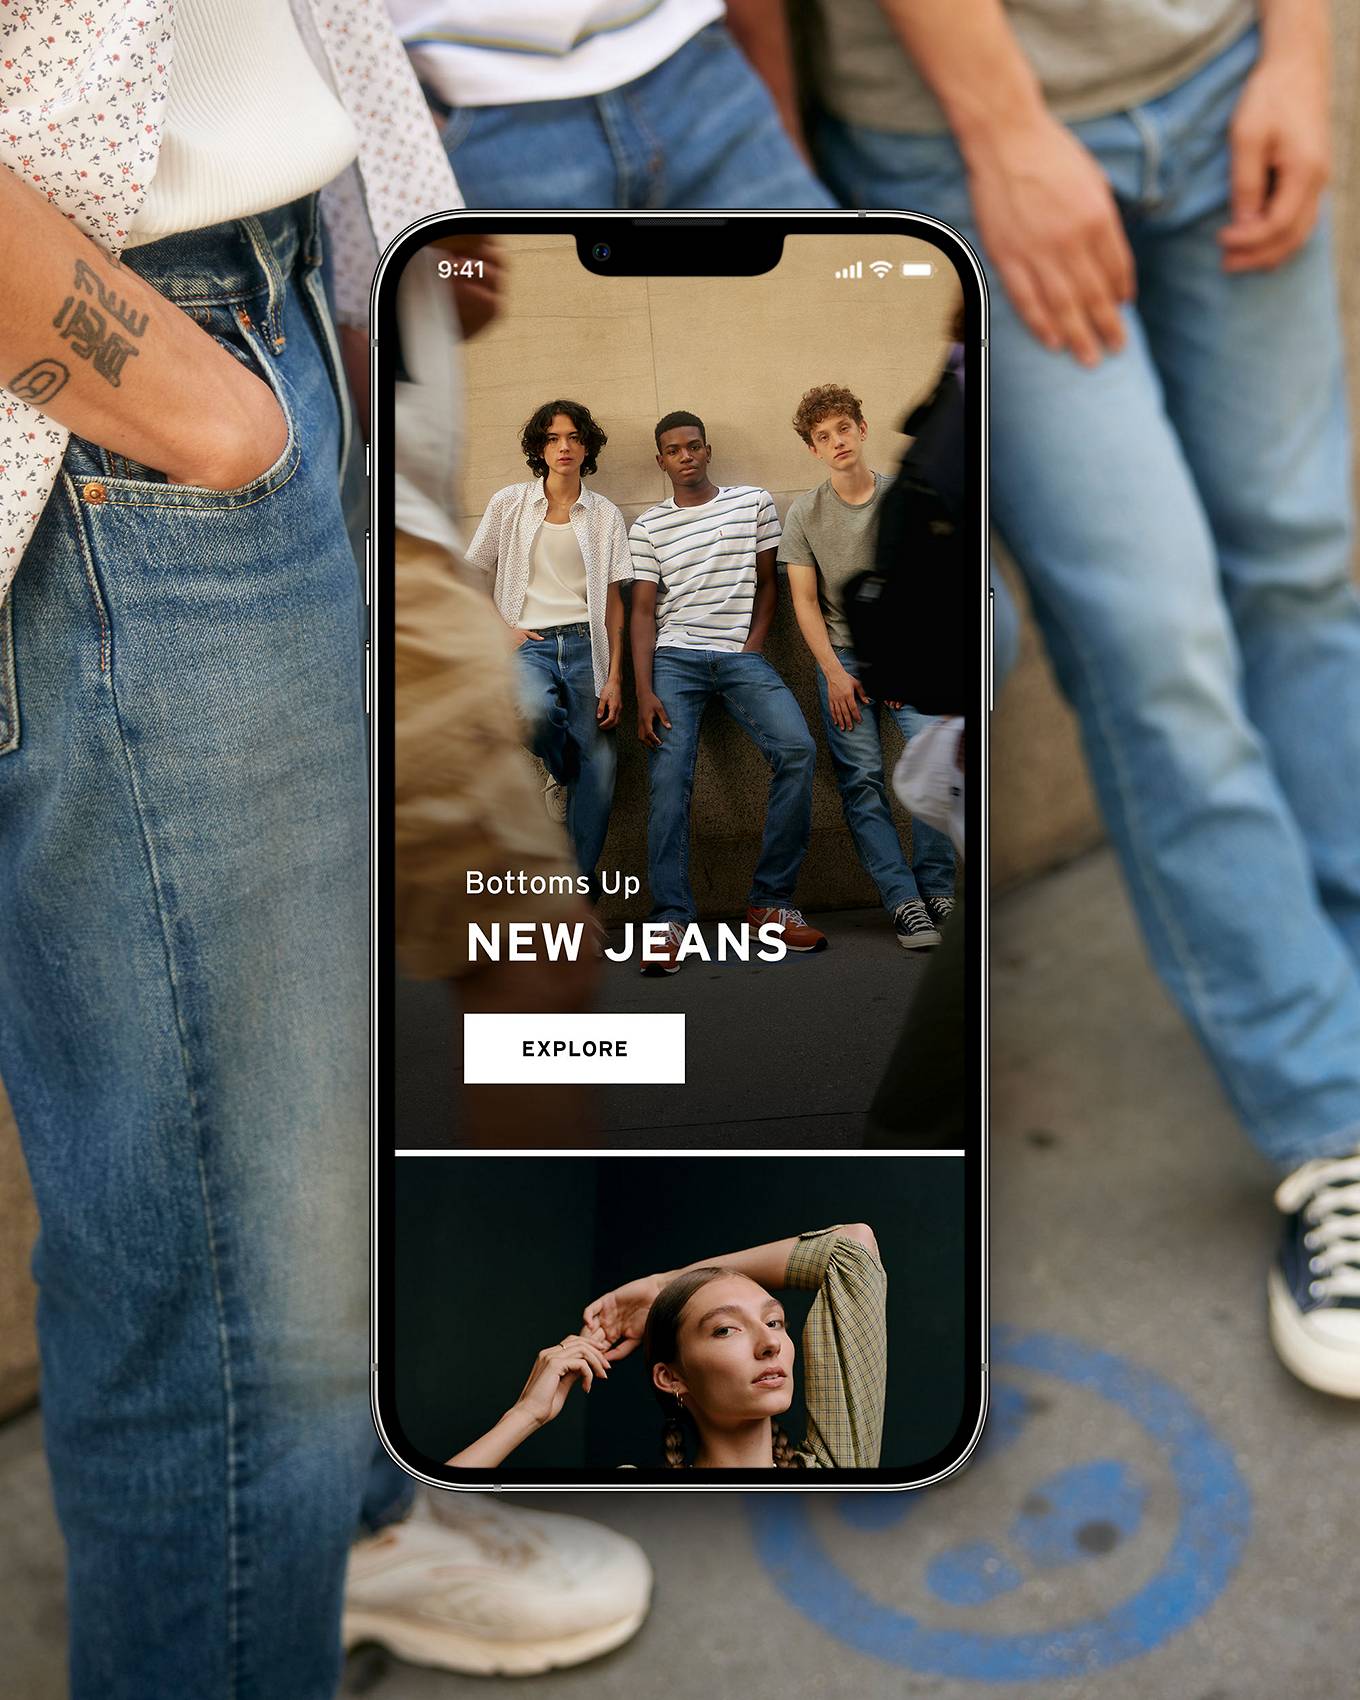 Instant Easy, Shopping - New jeans in app discover card